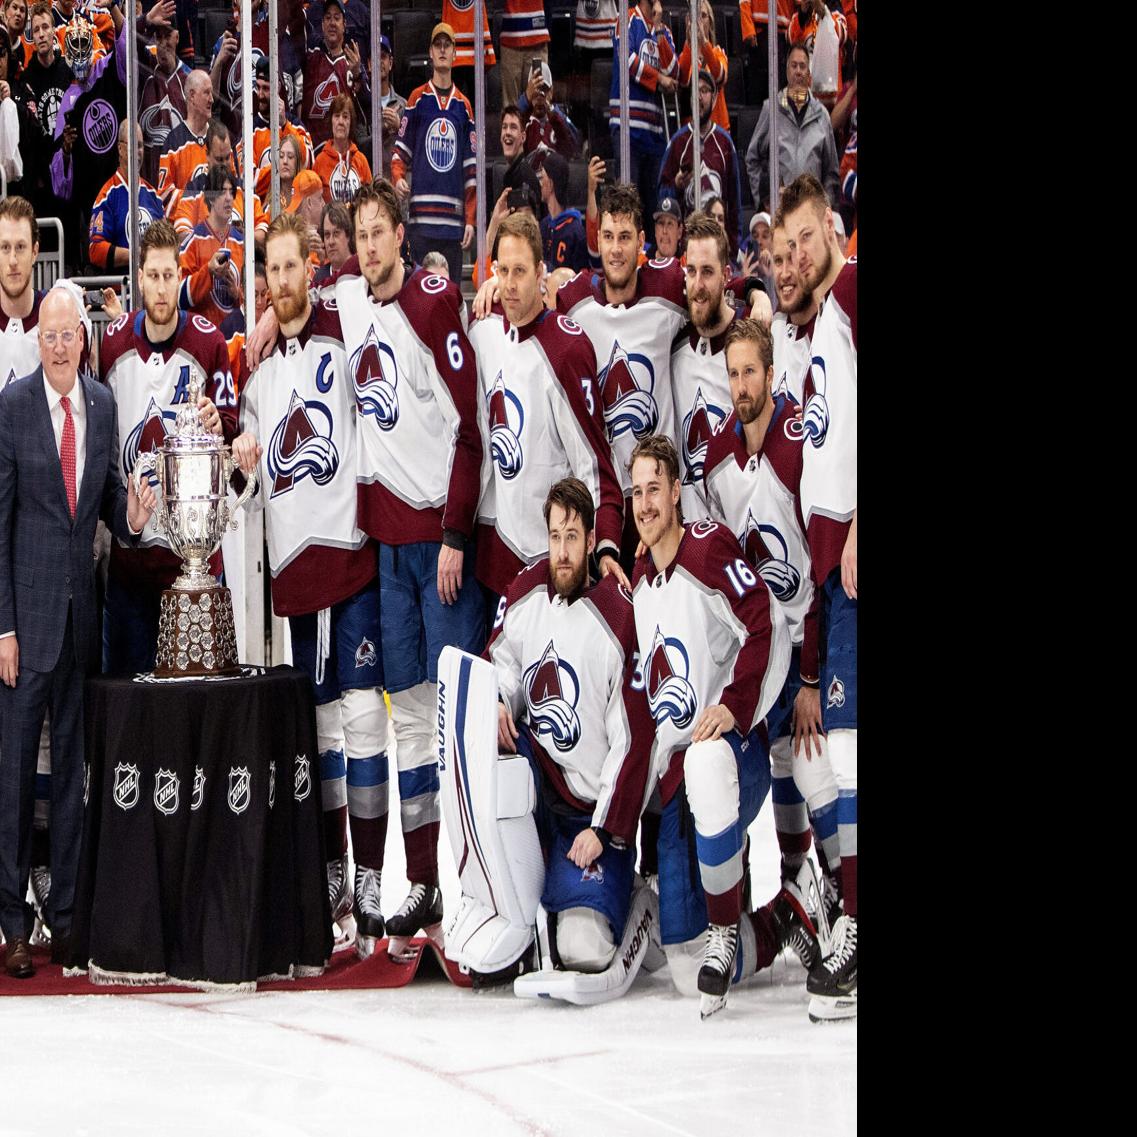 Colorado Avalanche: A Look at the Team's Top 6